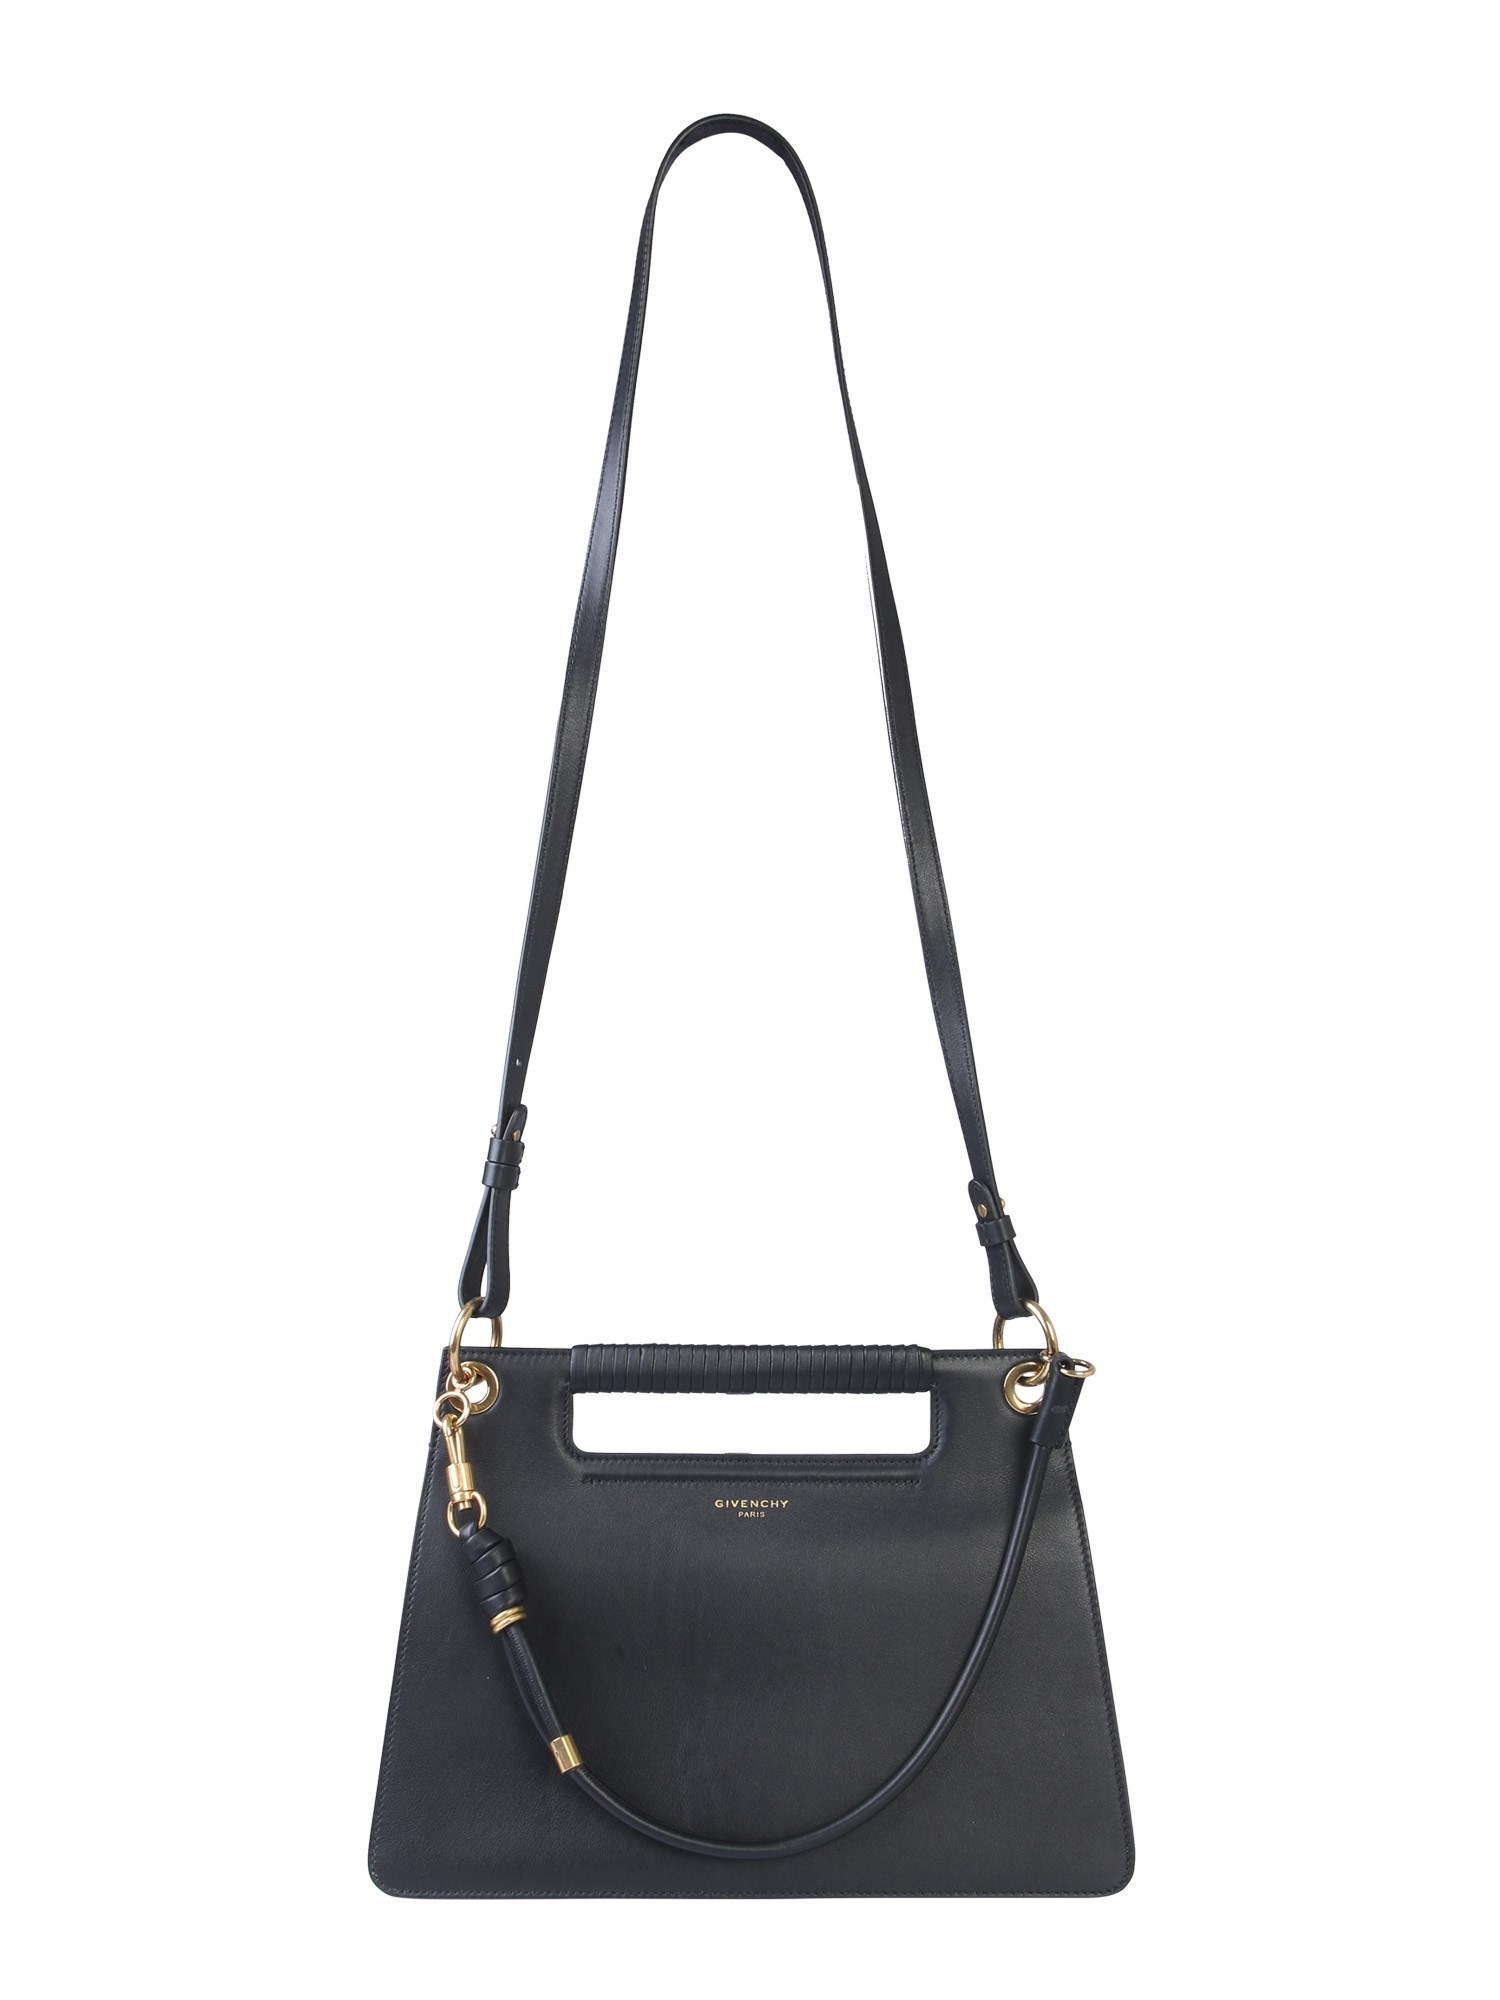 Givenchy Whip Bag In Black